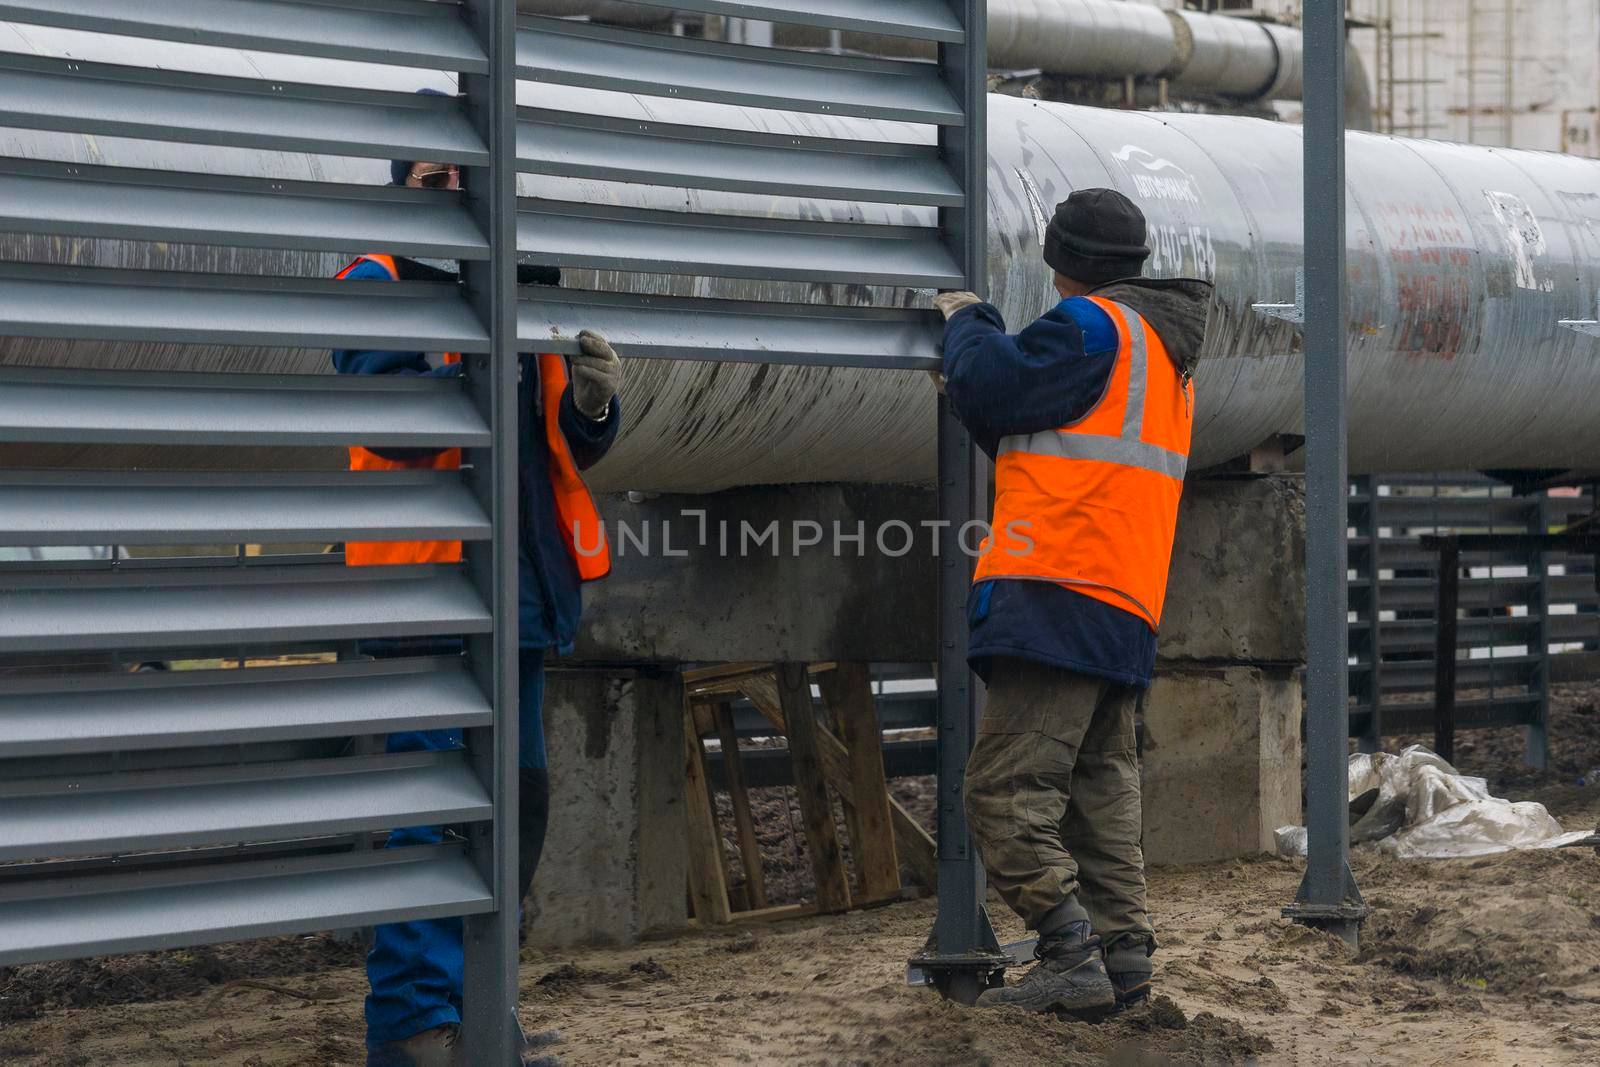 Workers build a fence, Bashkortostan, Russia - 19 June, 2022. by Essffes